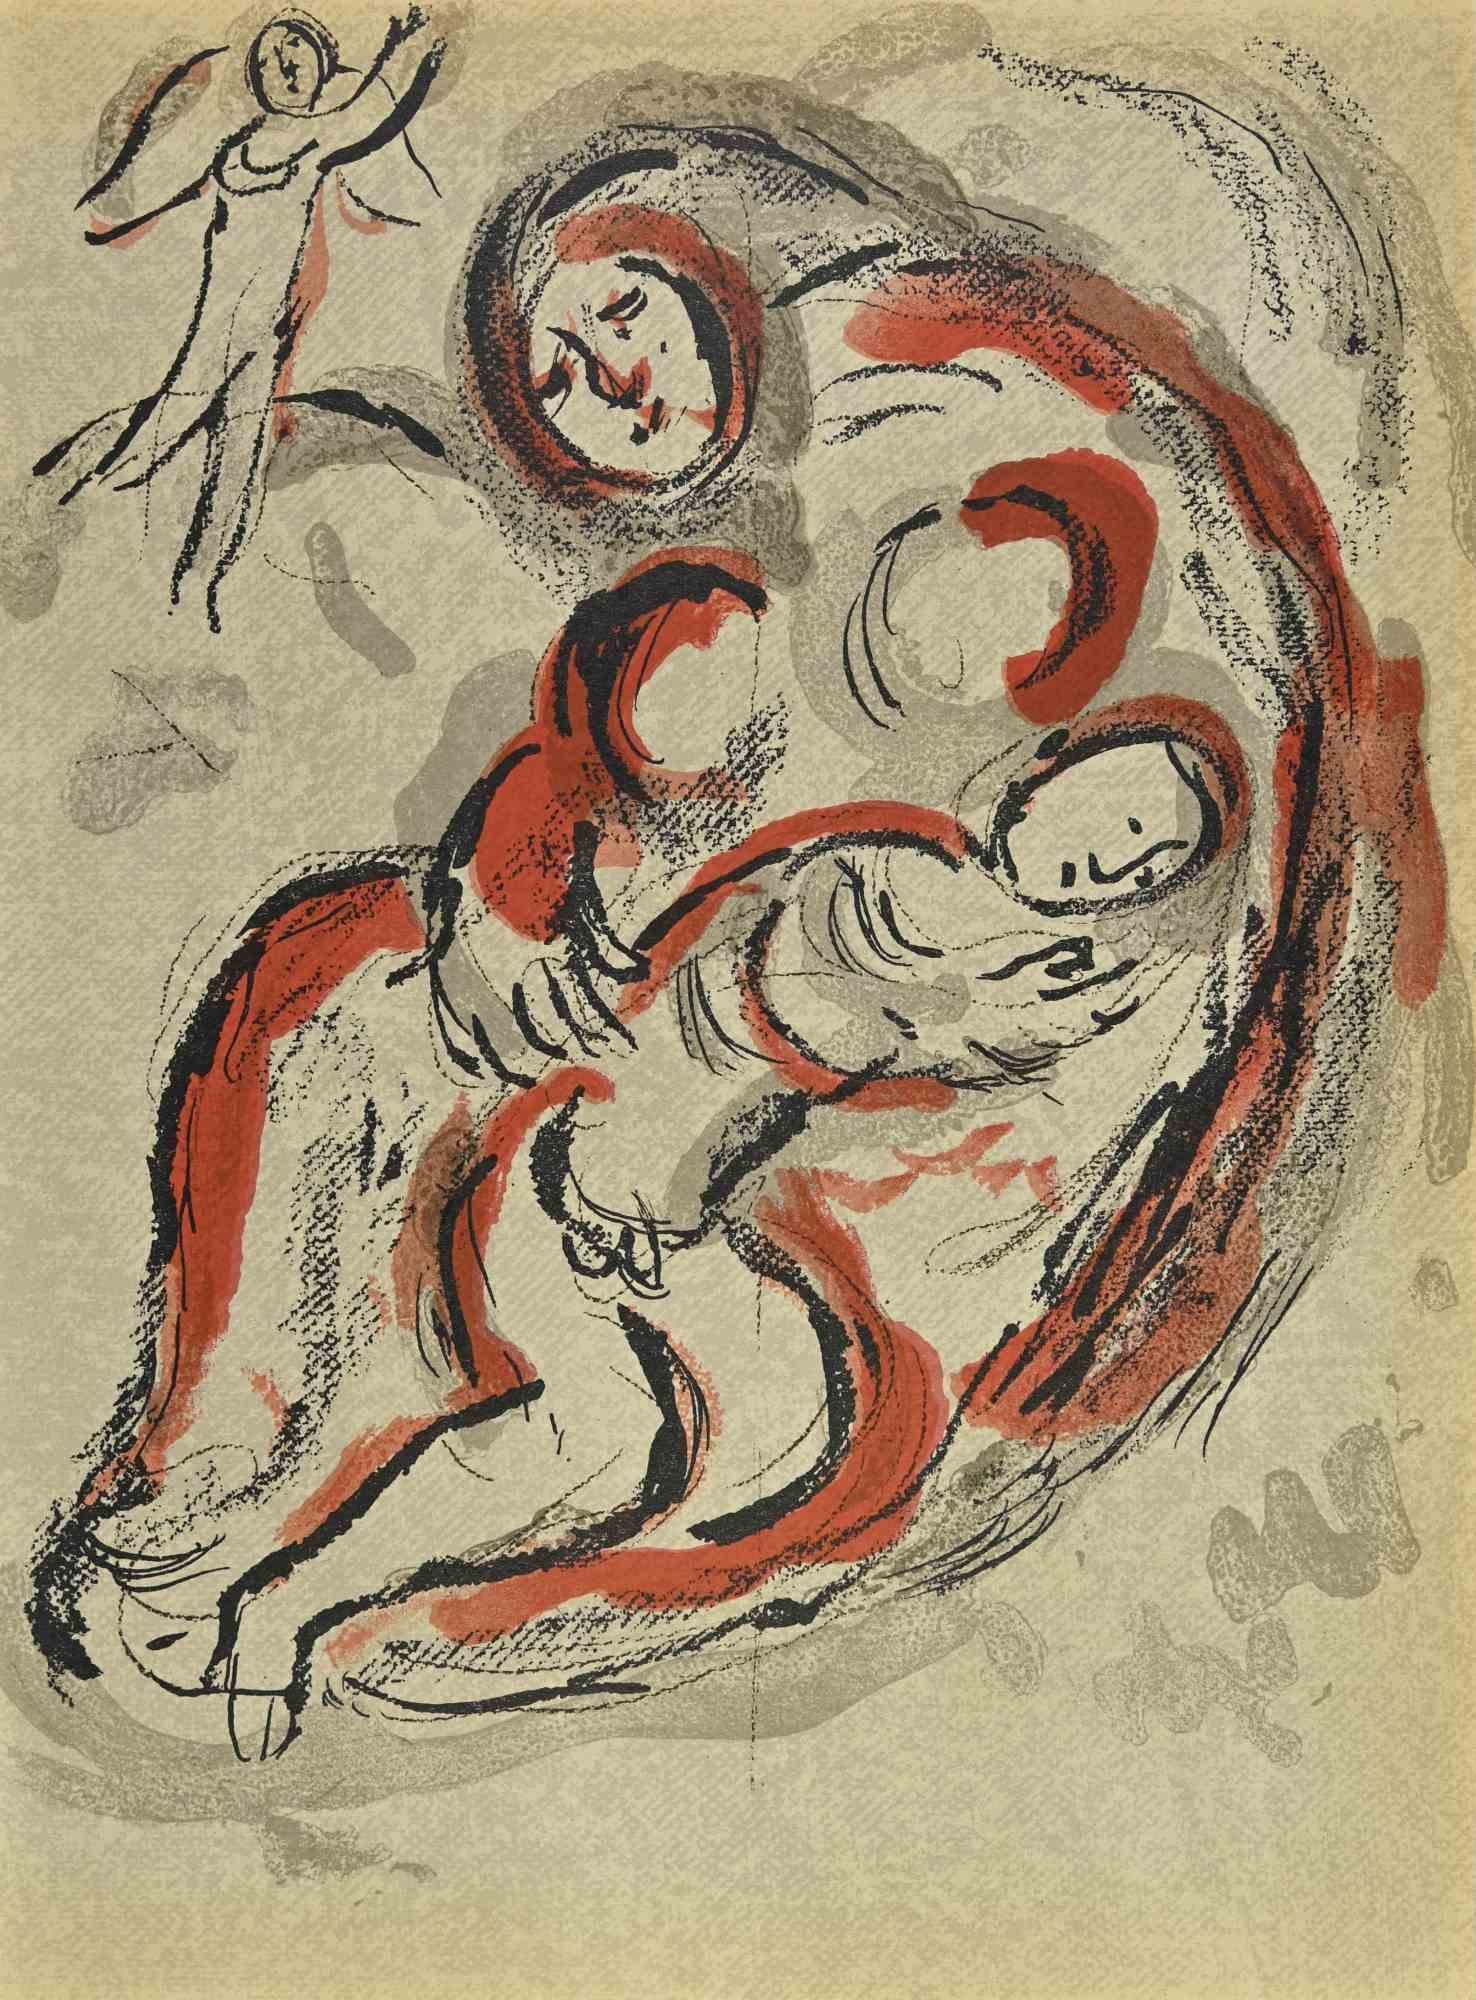 Hagar in the desert  is an artwork from the Series "The Bible", by Marc Chagall in 1960.
Mixed colored lithograph on brown-toned paper, no signature.
Edition of 6500 unsigned lithographs. Printed by Mourlot and published by Tériade, Paris.
Ref.